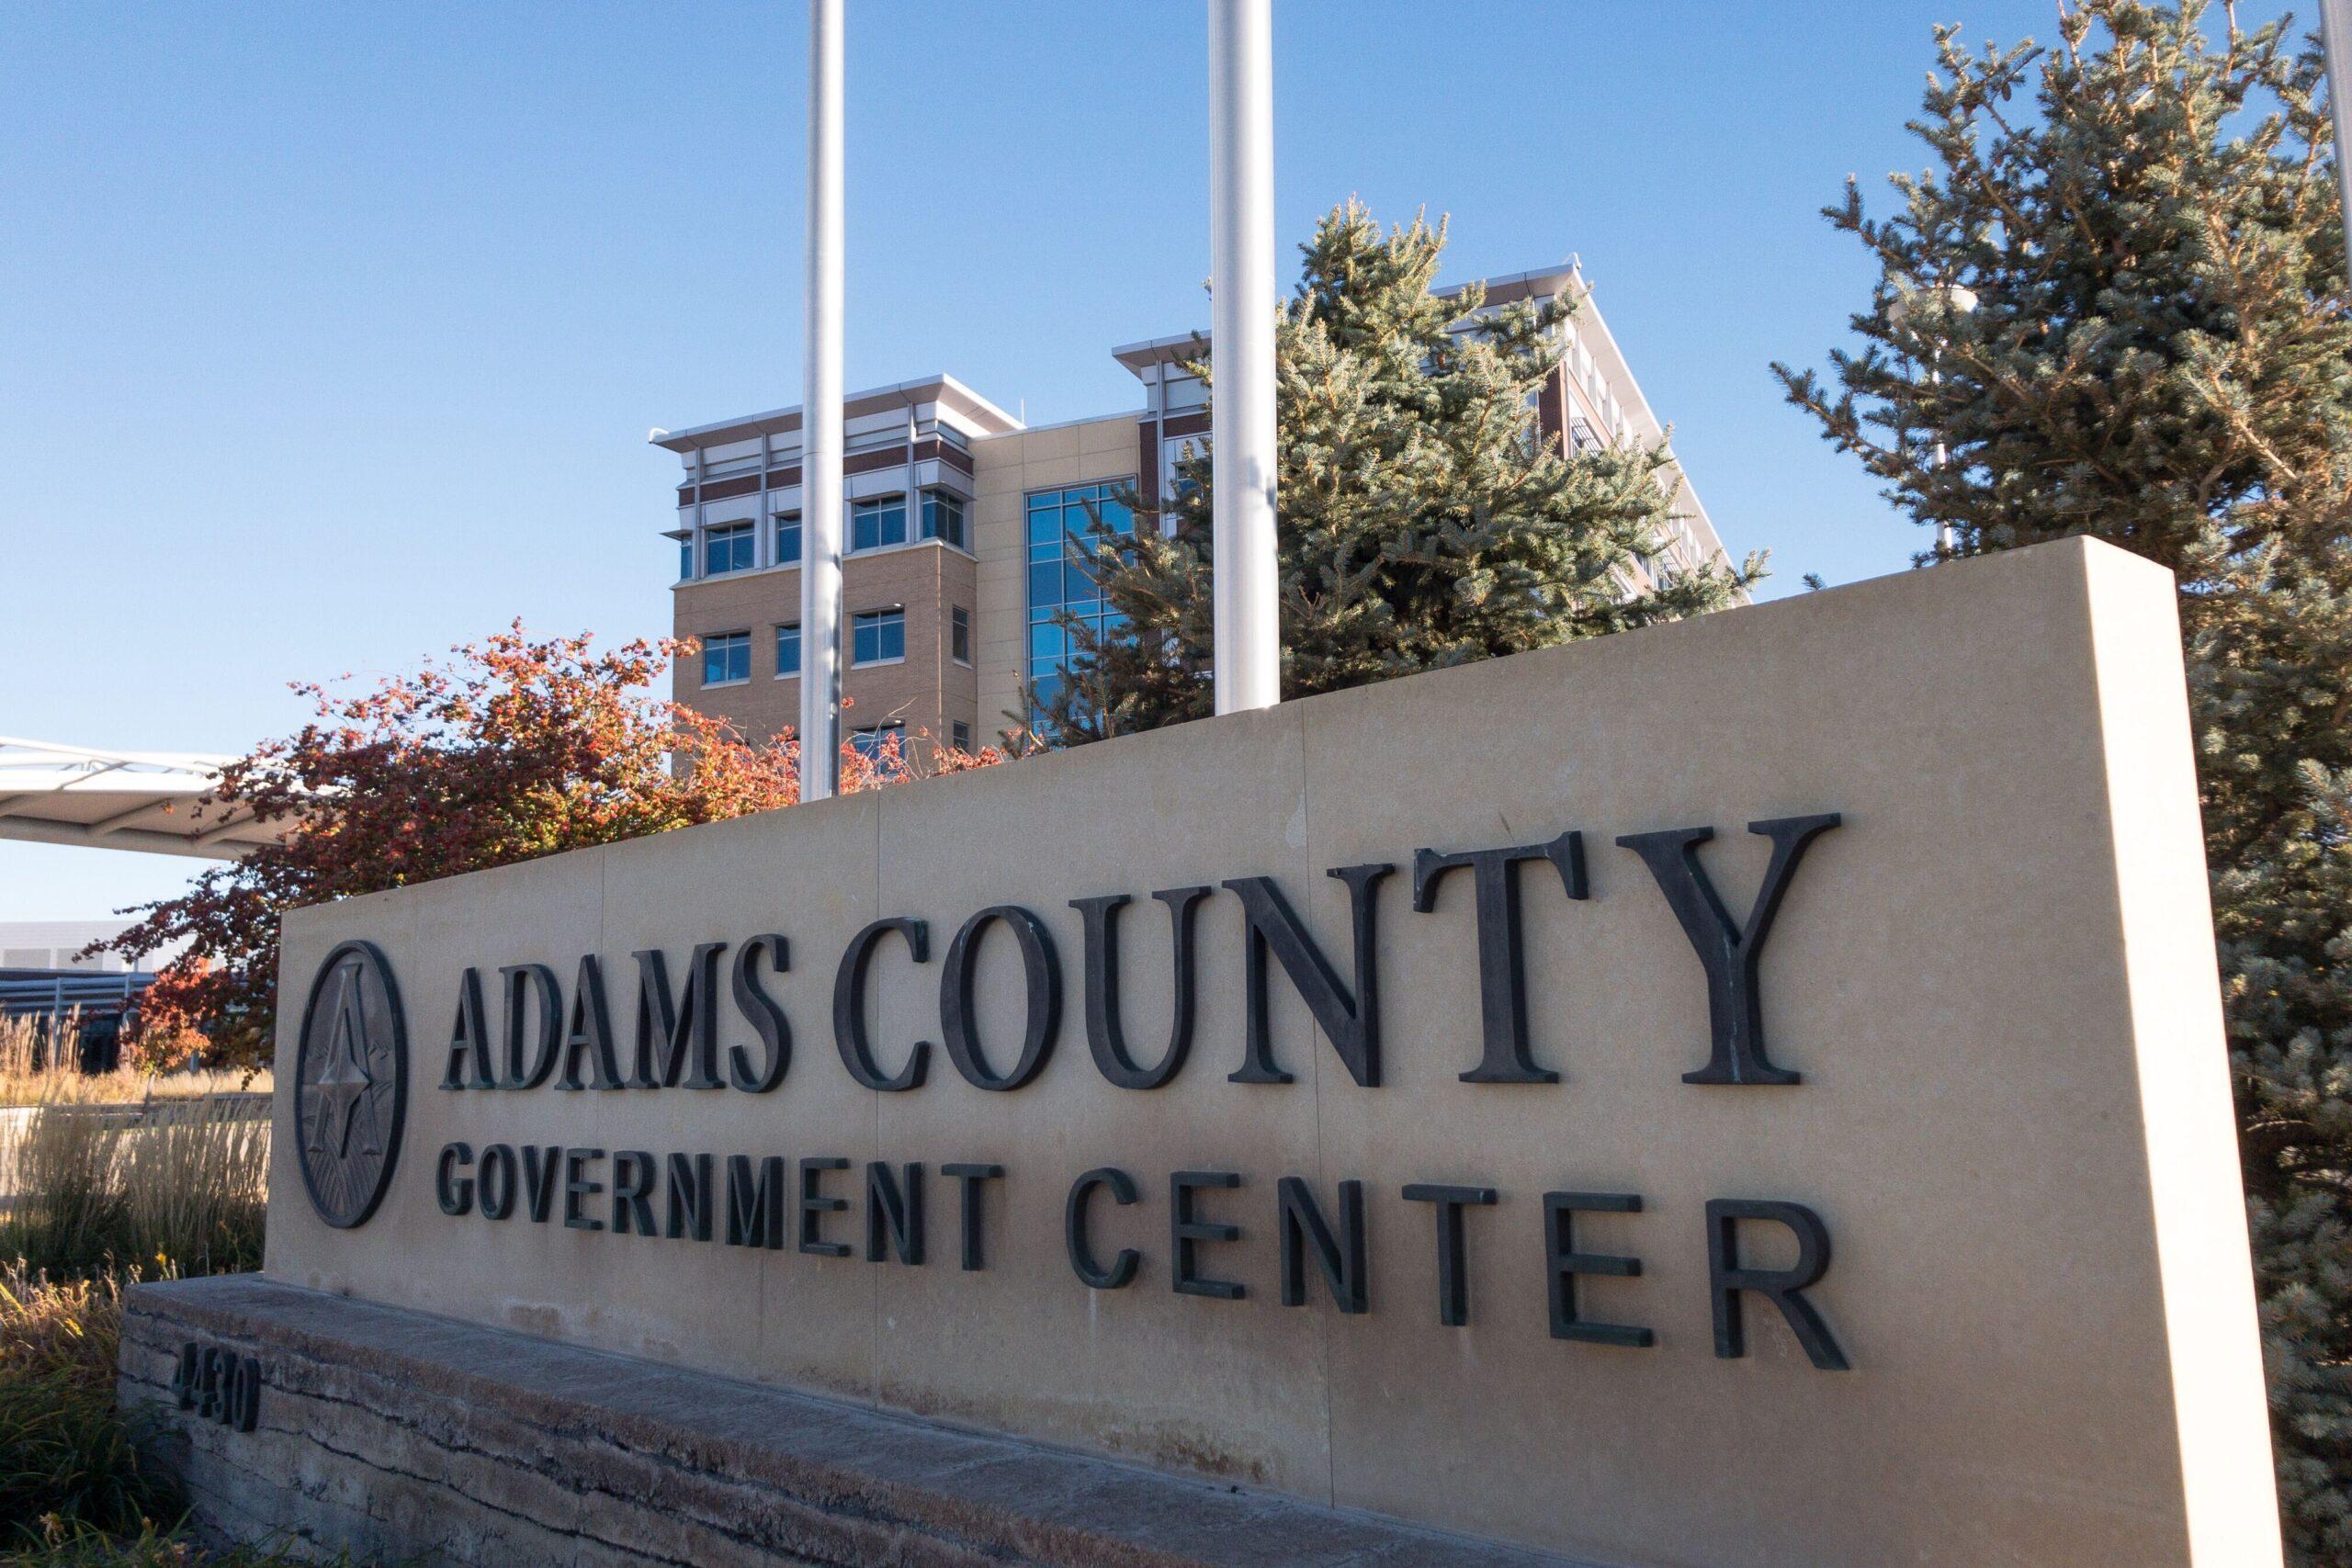 ADAMS-COUNTY-GOVERNMENT-CENTER-2